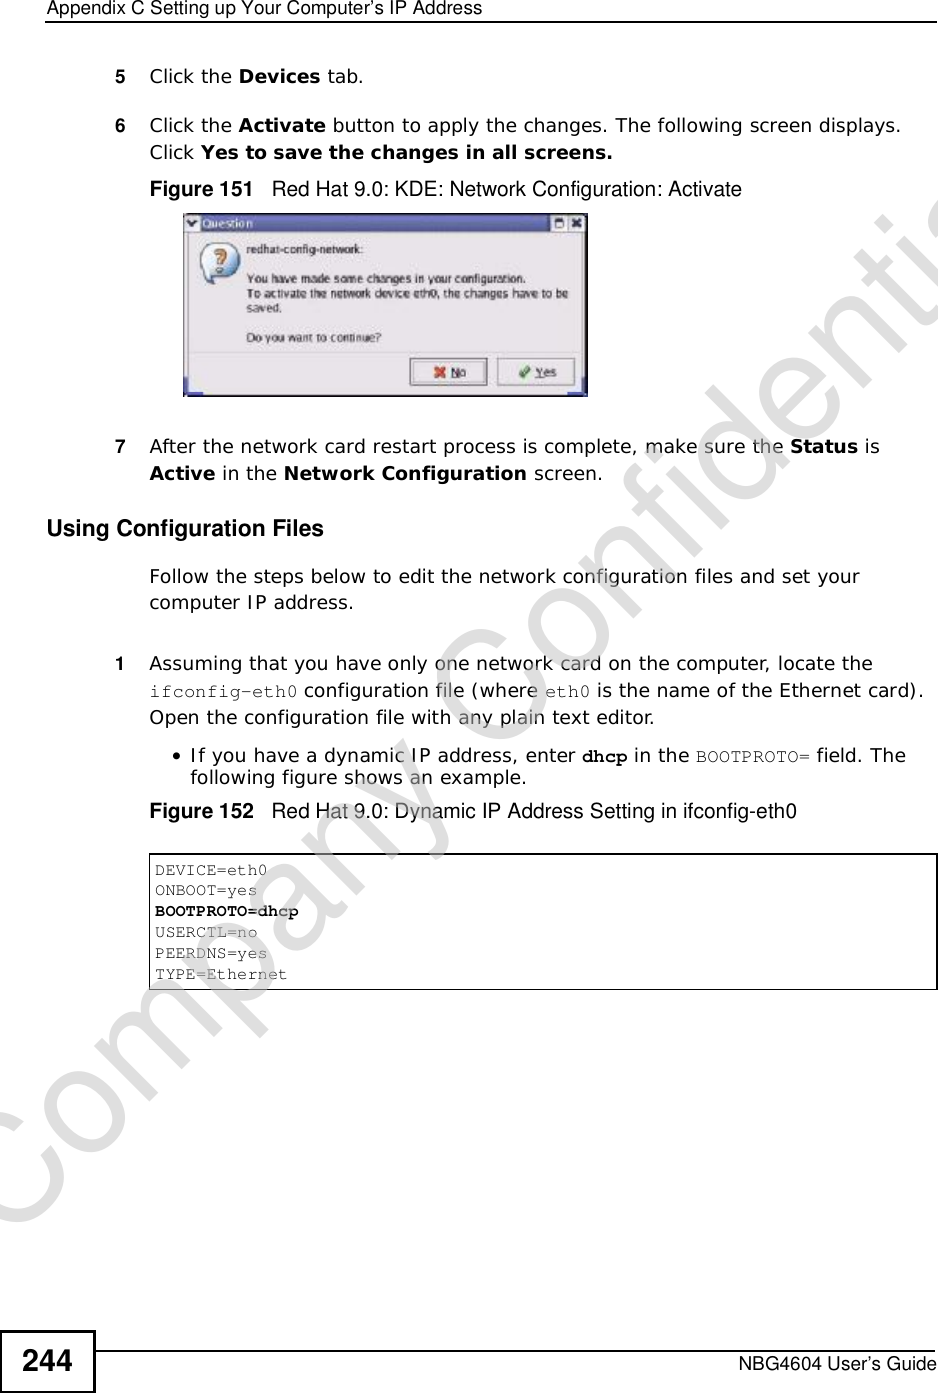 Appendix CSetting up Your Computer’s IP AddressNBG4604 User’s Guide2445Click the Devices tab. 6Click the Activate button to apply the changes. The following screen displays. Click Yes to save the changes in all screens.Figure 151   Red Hat 9.0: KDE: Network Configuration: Activate 7After the network card restart process is complete, make sure the Status is Active in the Network Configuration screen.Using Configuration FilesFollow the steps below to edit the network configuration files and set your computer IP address. 1Assuming that you have only one network card on the computer, locate the ifconfig-eth0 configuration file (where eth0 is the name of the Ethernet card). Open the configuration file with any plain text editor.•If you have a dynamic IP address, enter dhcp in the BOOTPROTO= field. The following figure shows an example. Figure 152   Red Hat 9.0: Dynamic IP Address Setting in ifconfig-eth0 DEVICE=eth0ONBOOT=yesBOOTPROTO=dhcpUSERCTL=noPEERDNS=yesTYPE=EthernetCompany Confidential